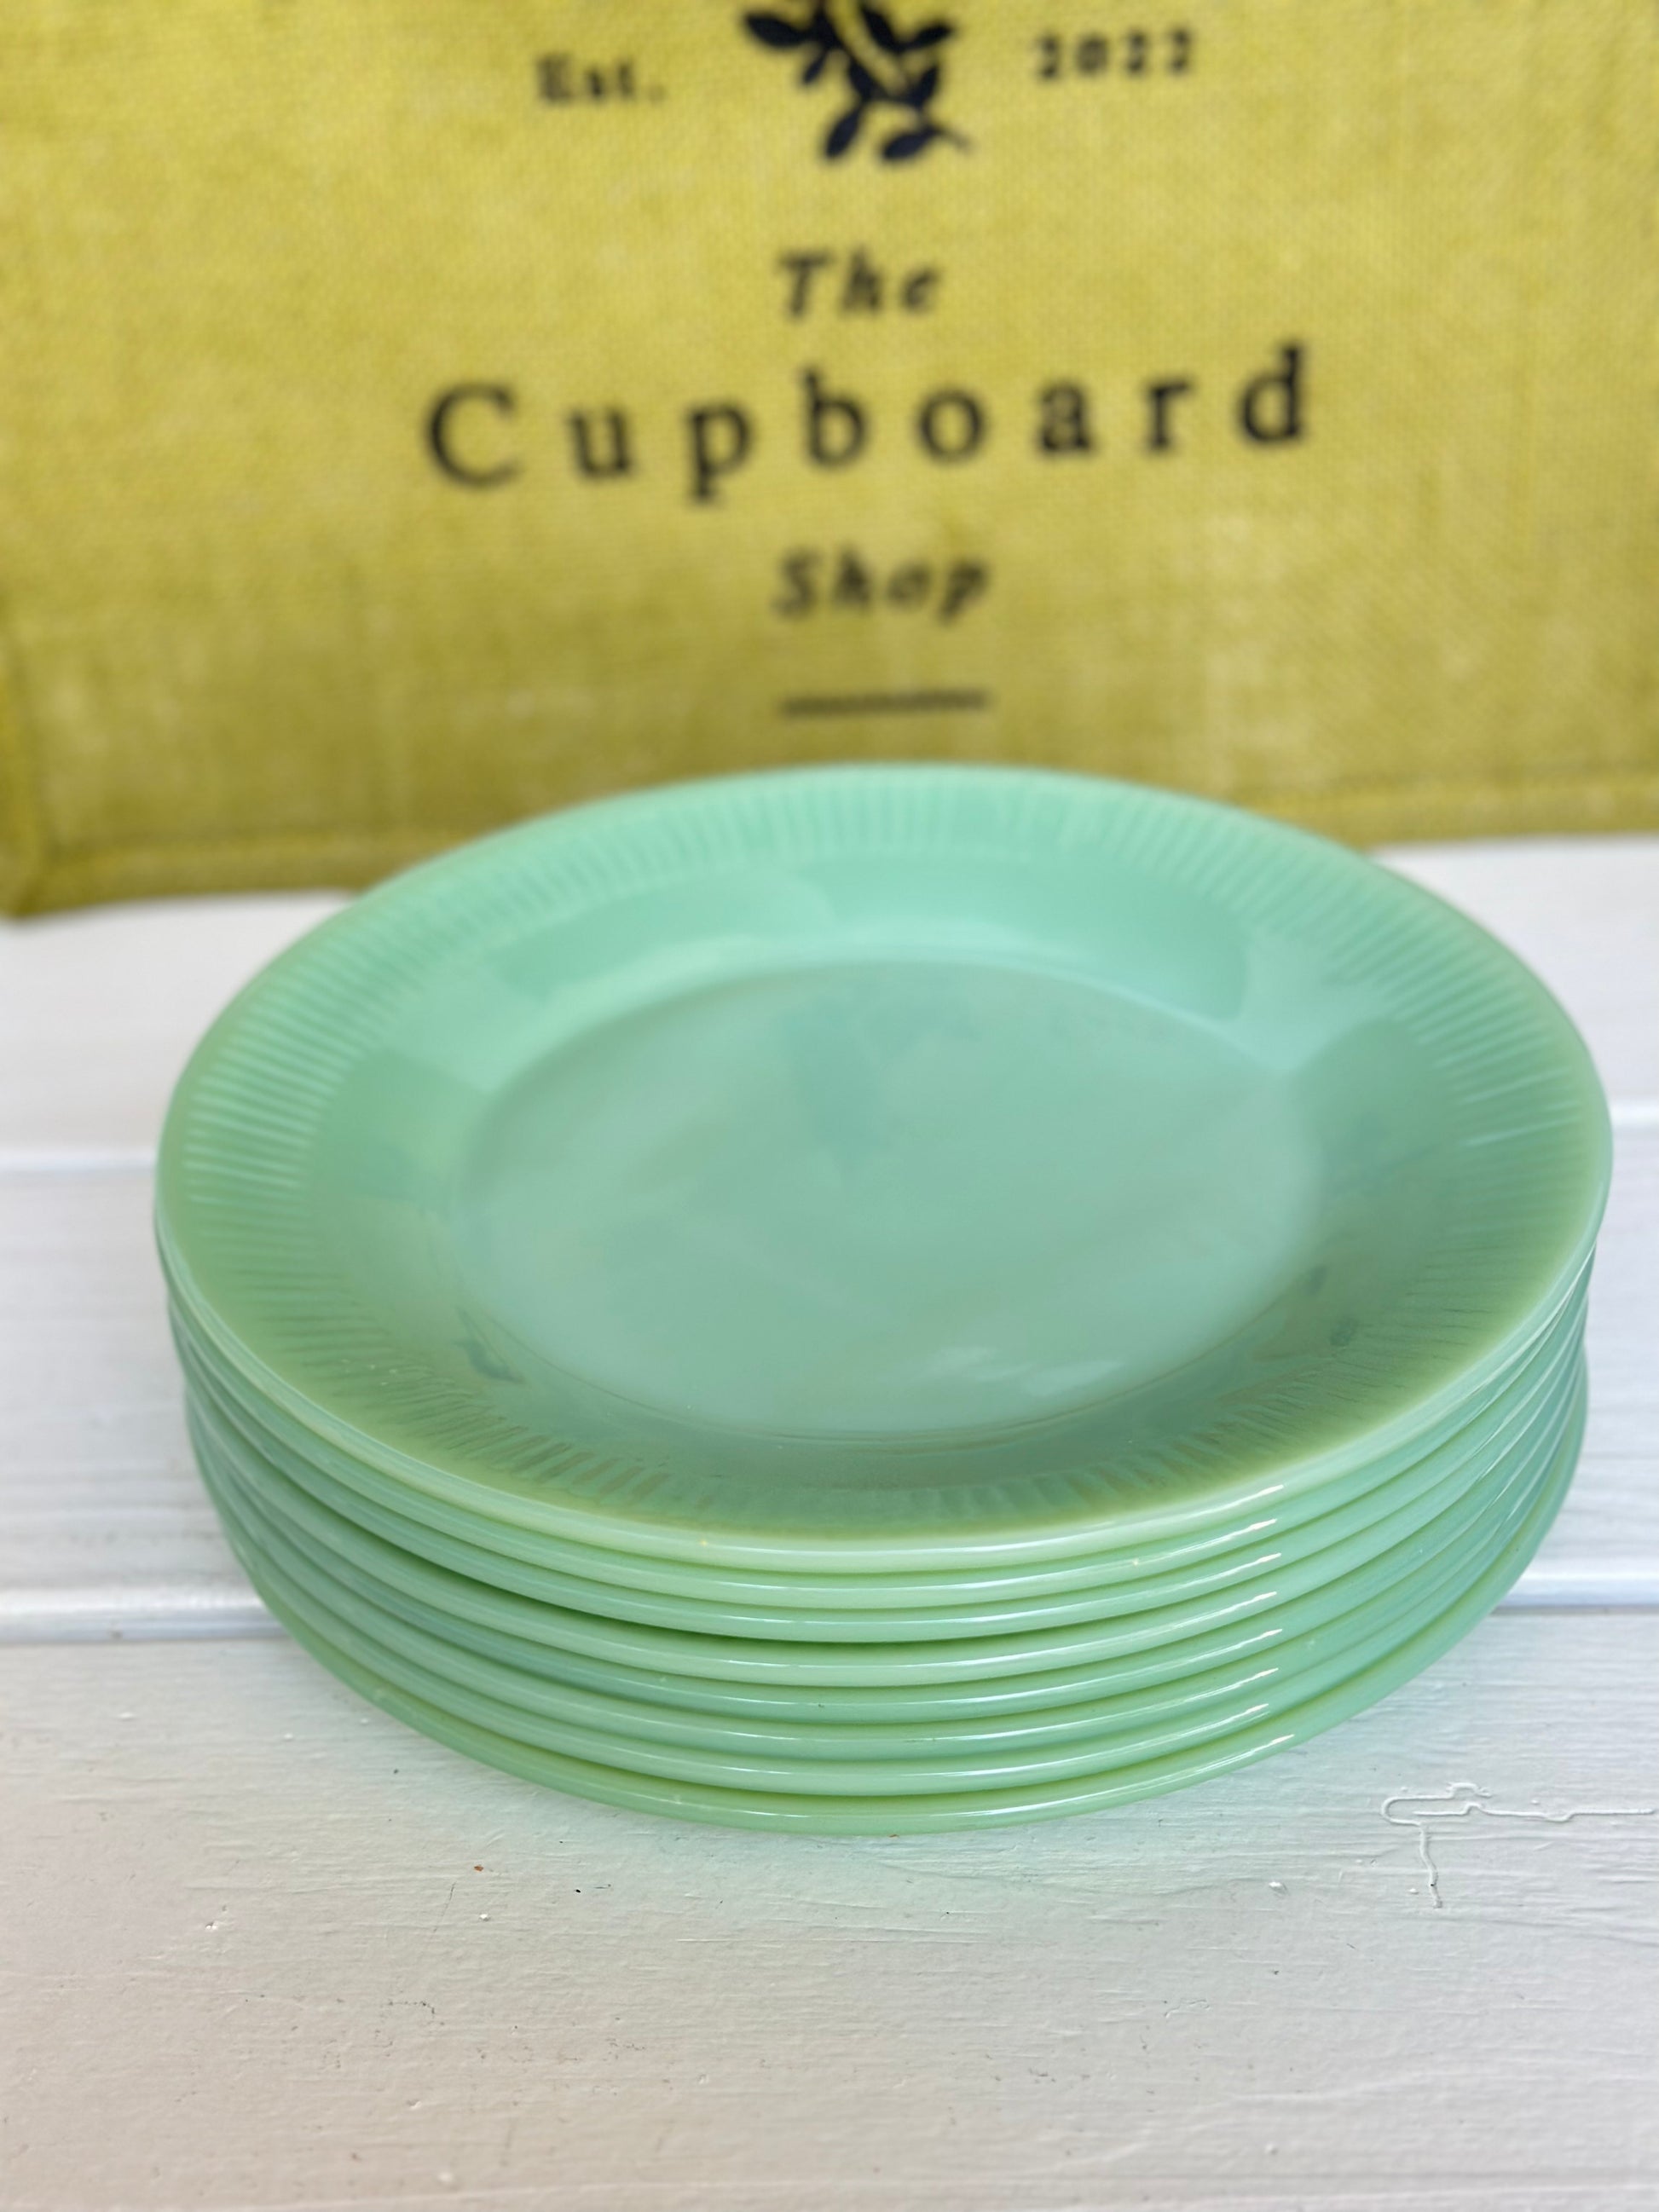 Vintage-Looking Jadeite, Milk Glass, and Pyrex Dishes To Buy